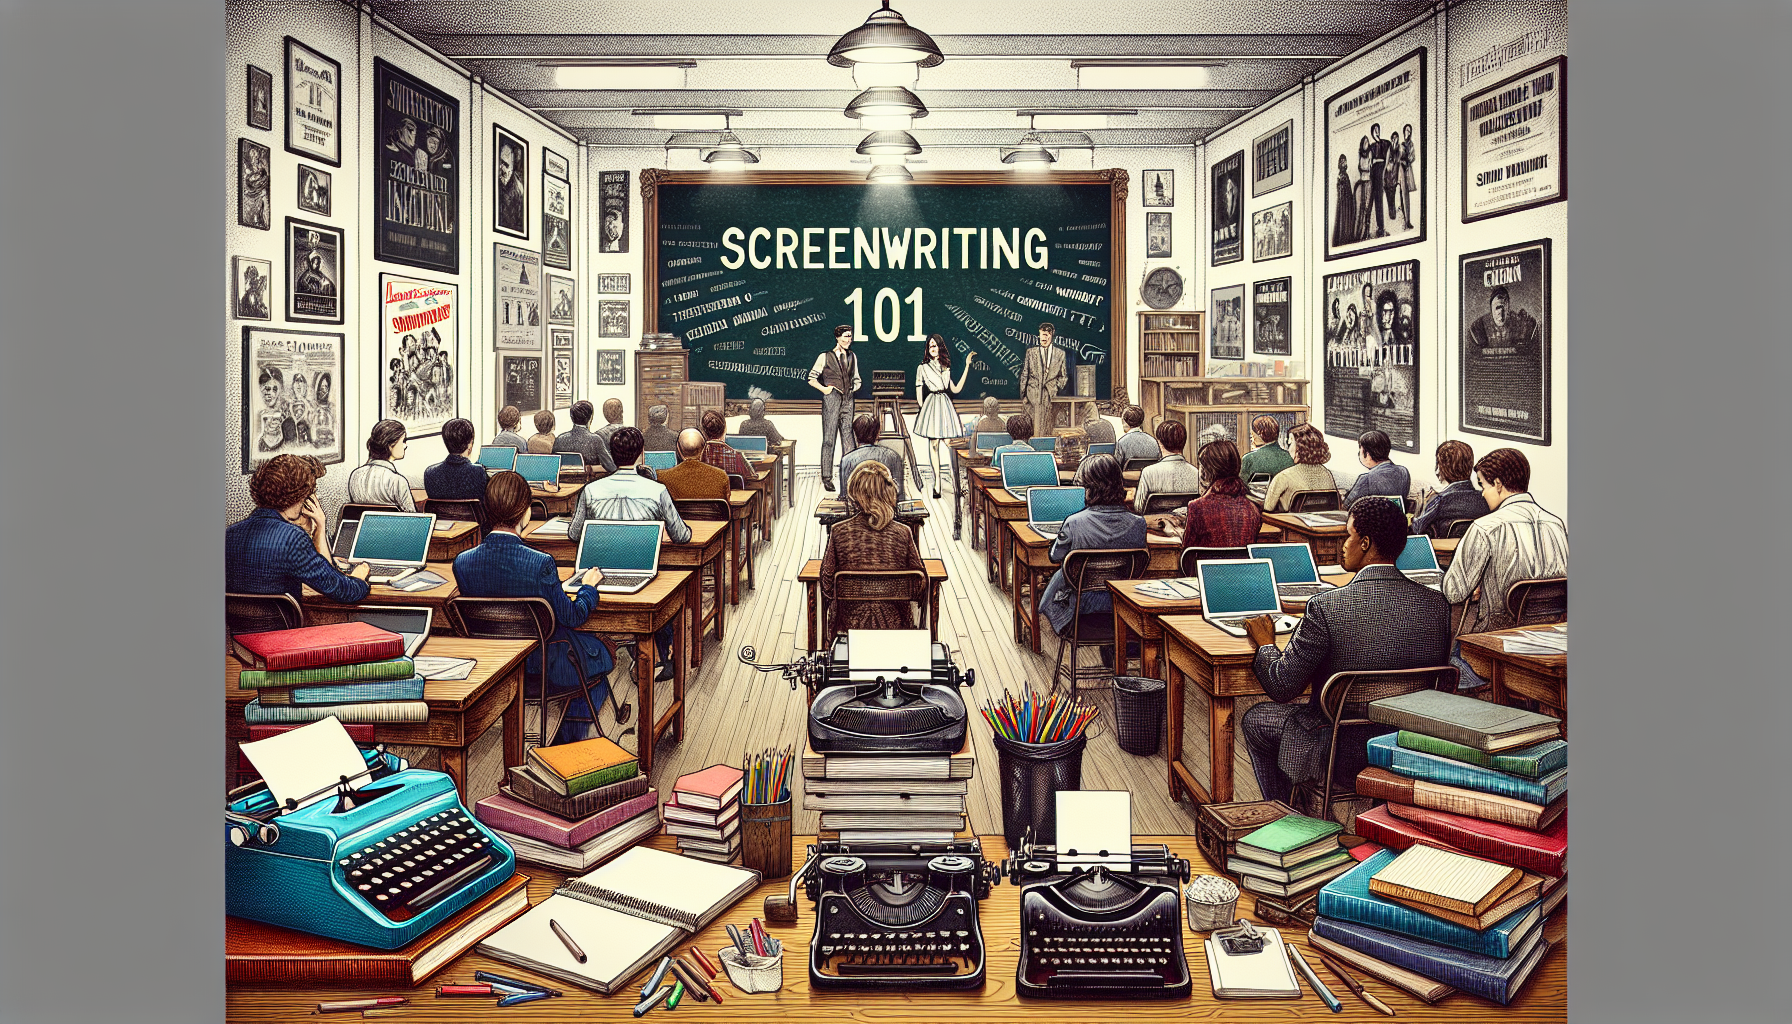 An artistically designed classroom setting filled with various types of classic and modern writing equipment like typewriters, laptops, notebooks, and stacks of screenplays. In the background, a large